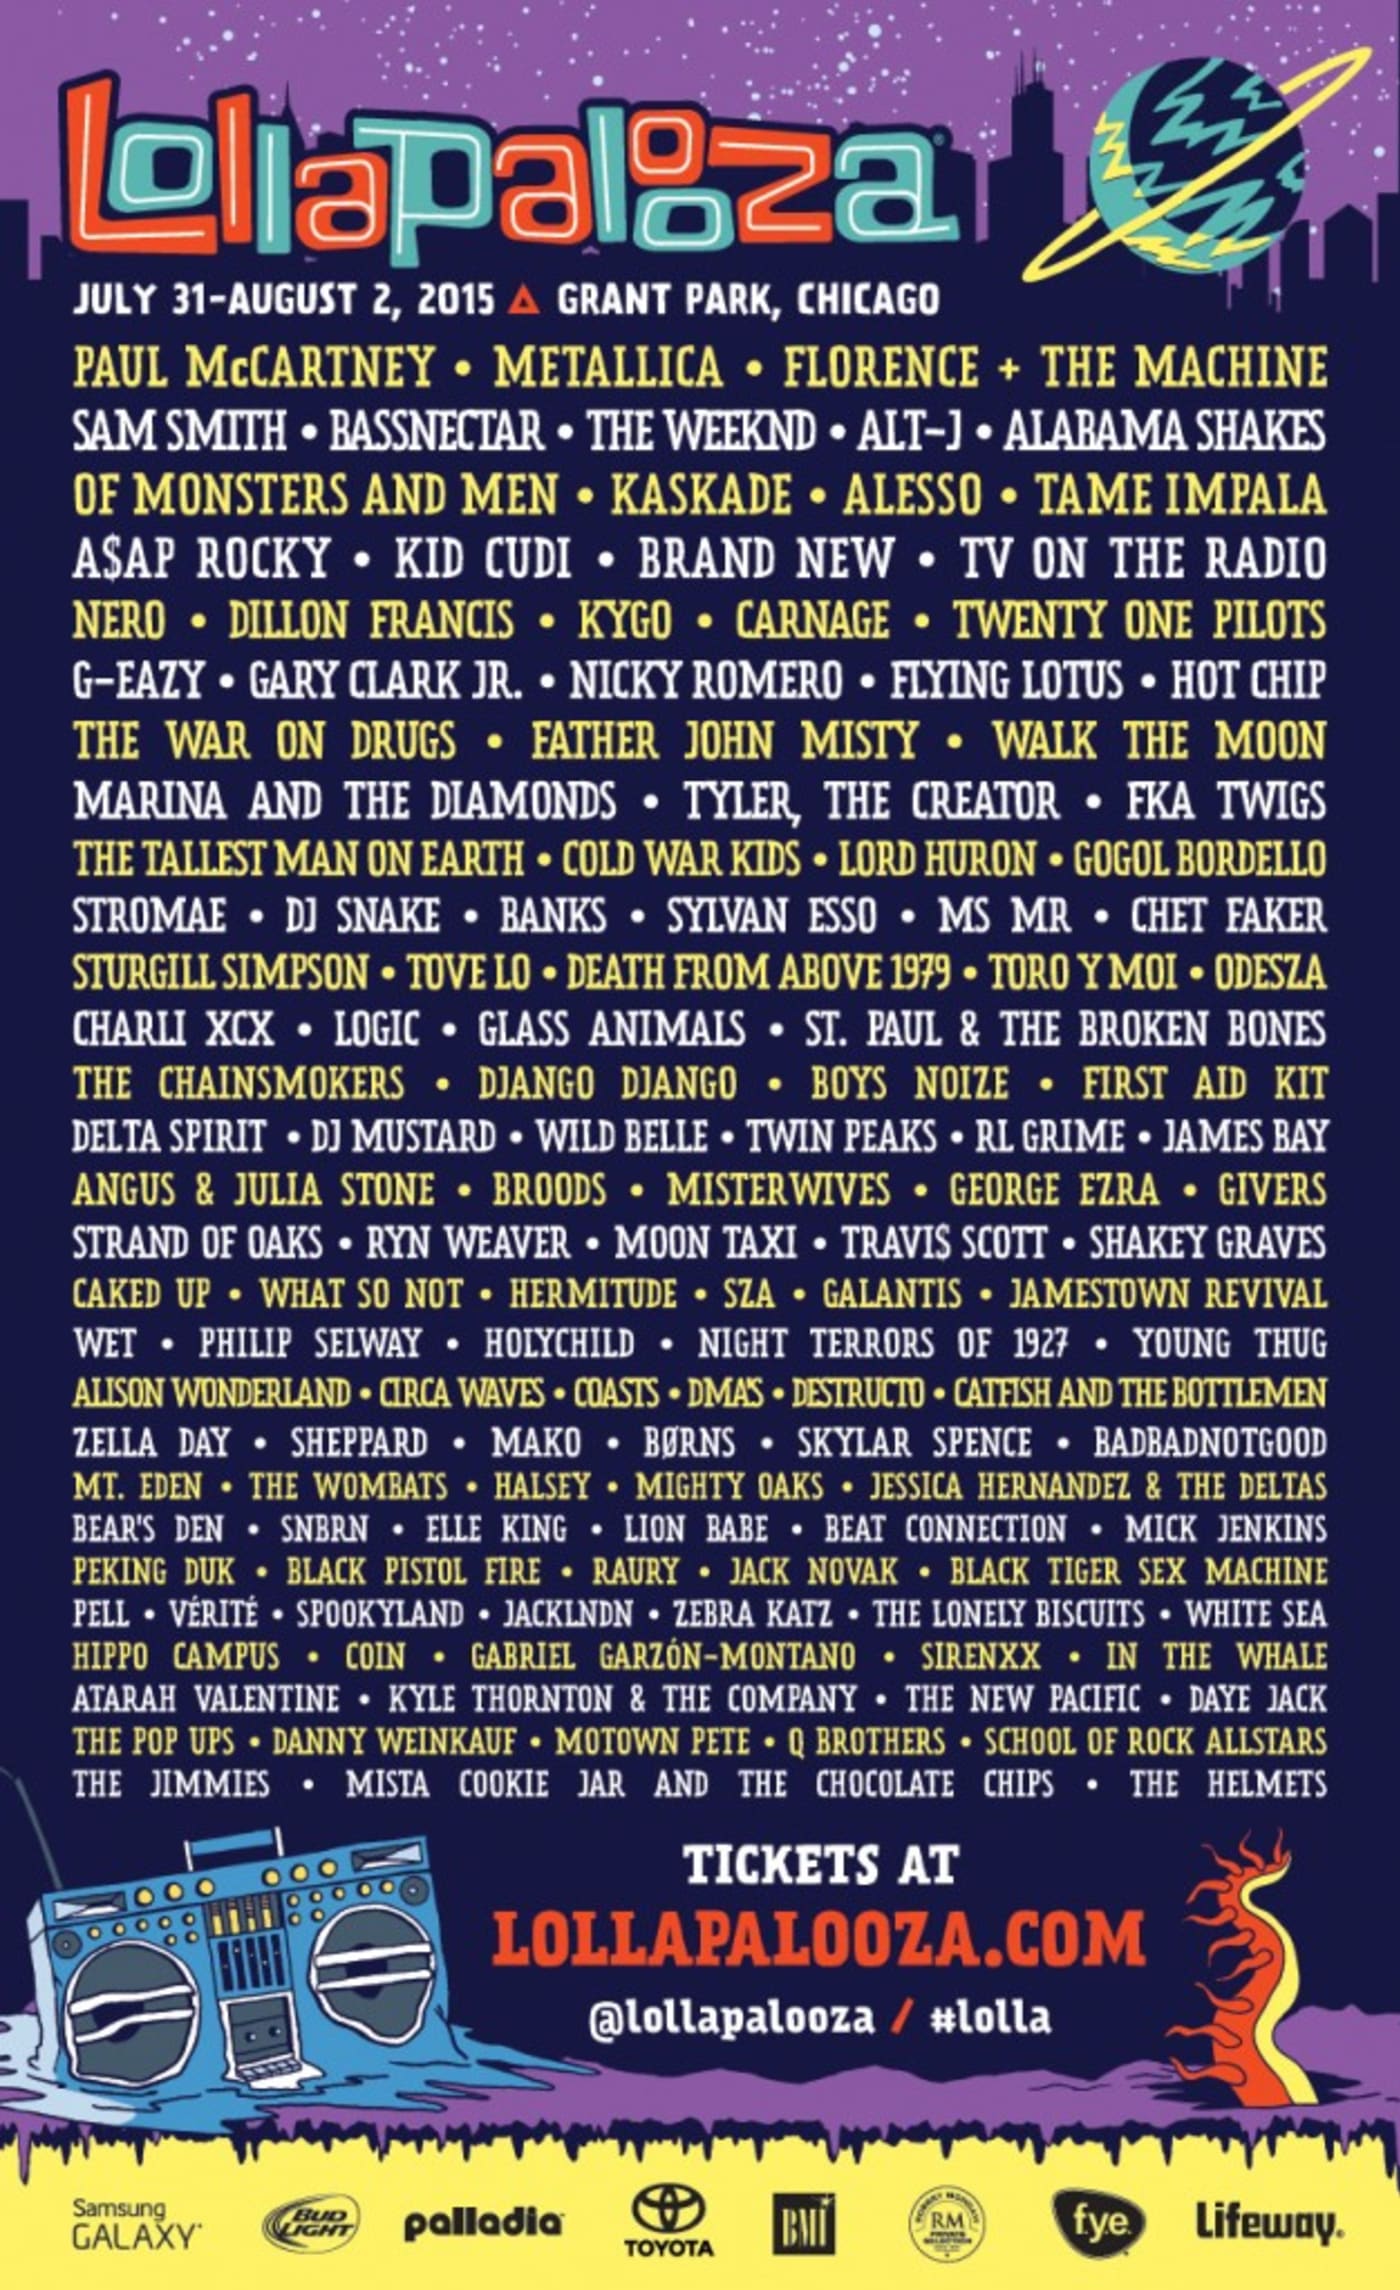 Here’s the Official Lineup for Lollapalooza 2015 Complex